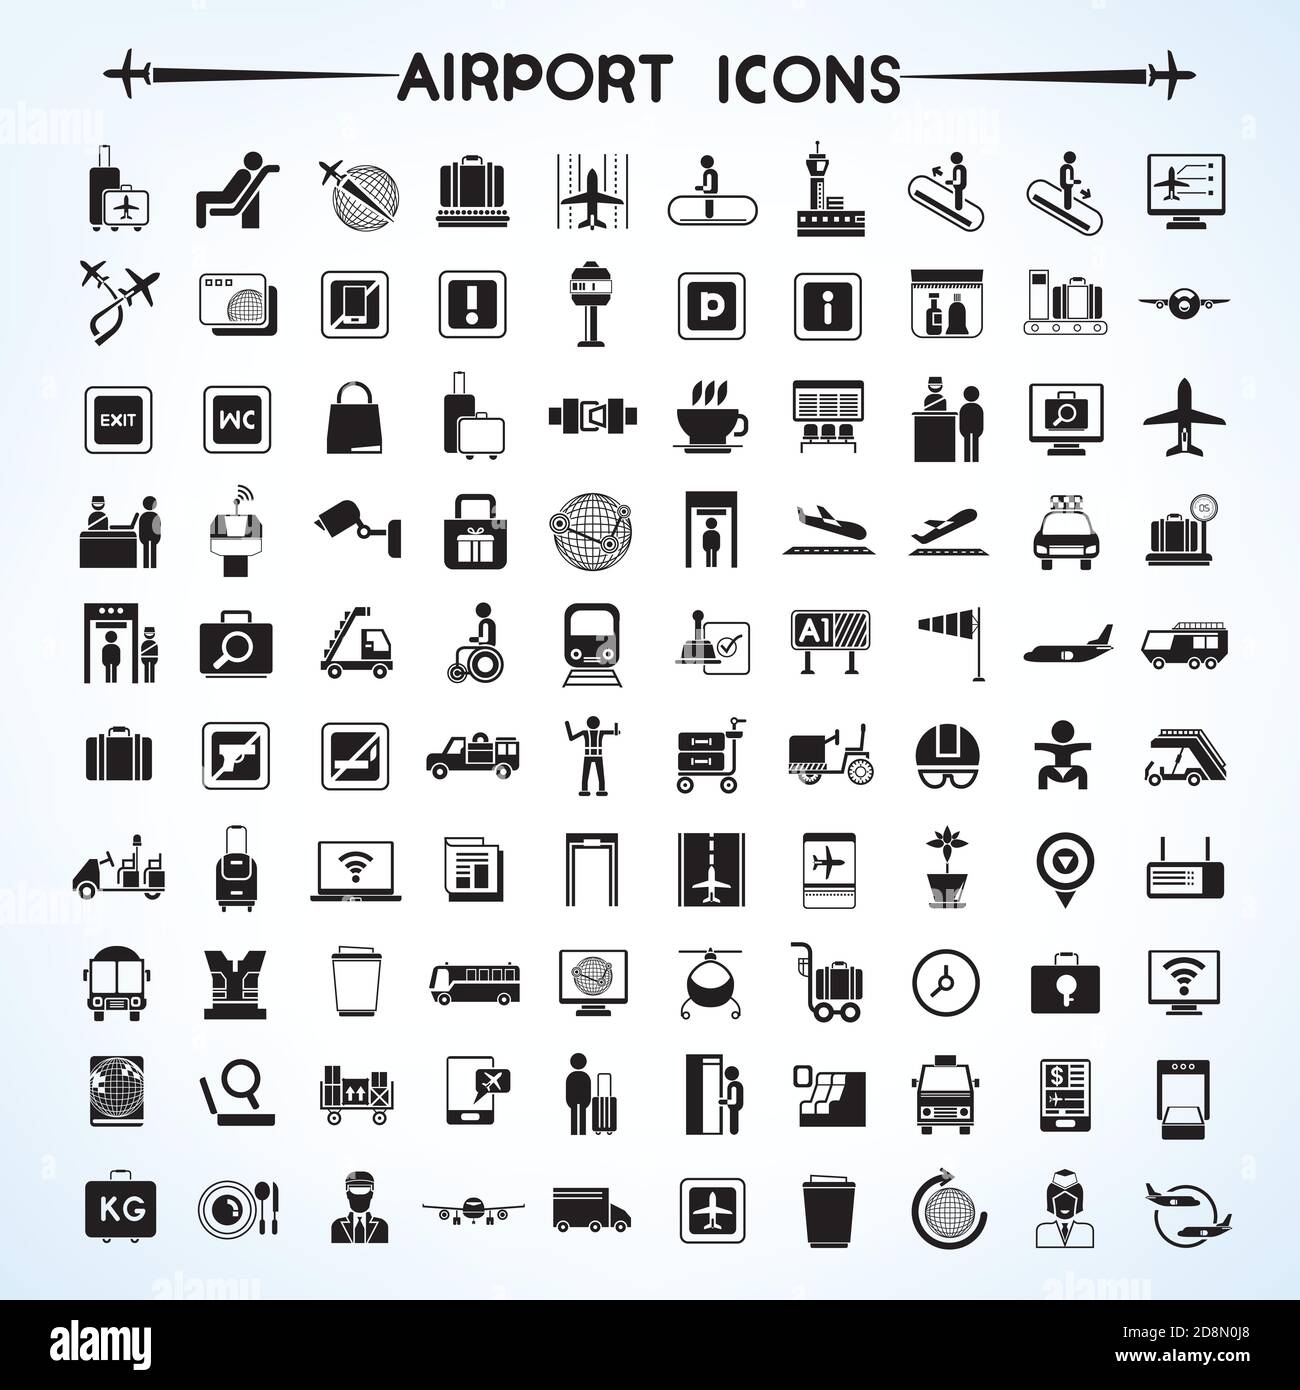 airport icon set, airport management icons, aerial transportation icons Stock Vector